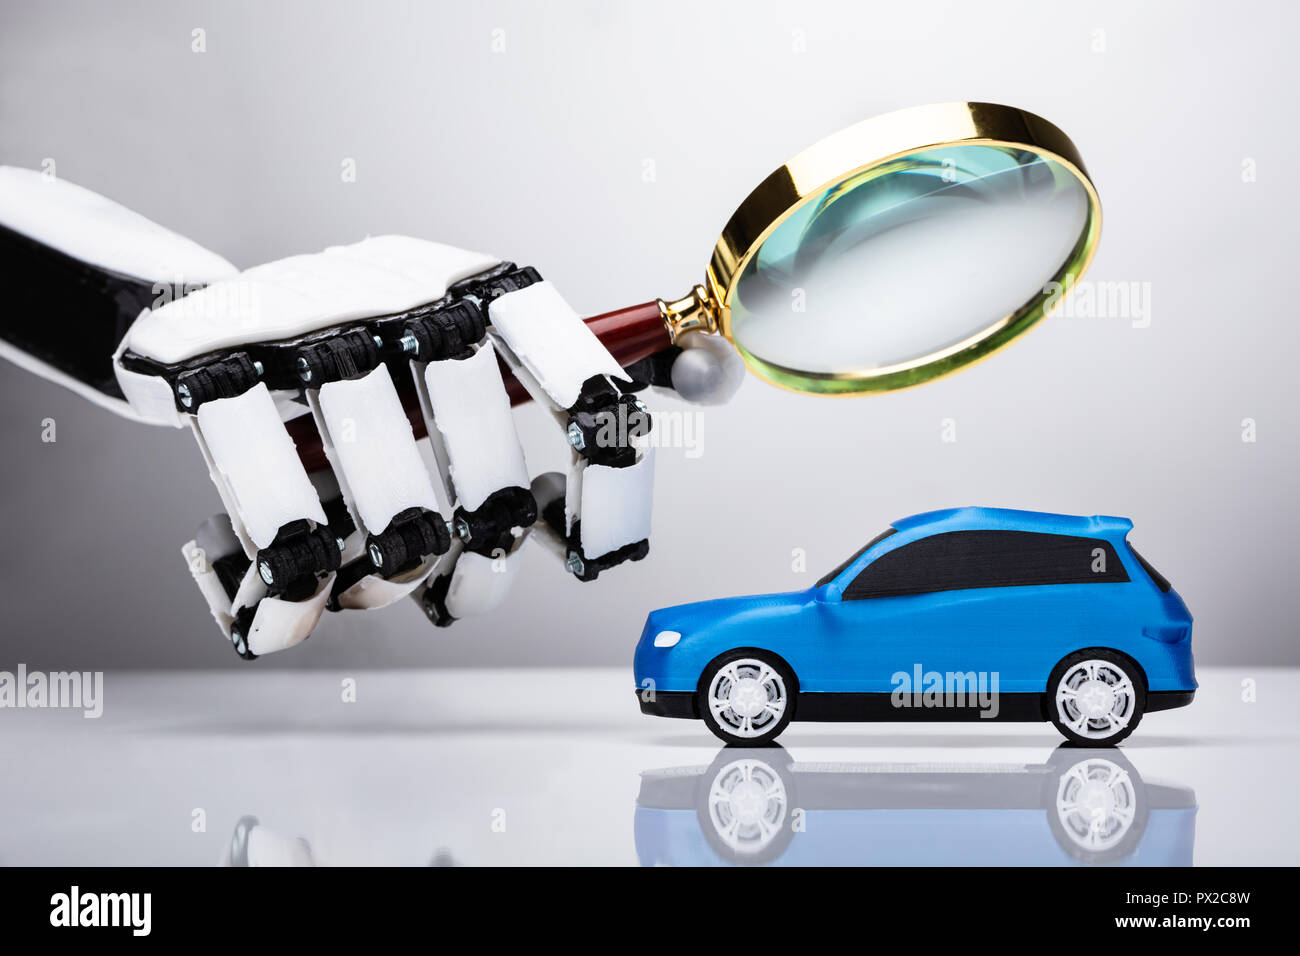 Robot Examining Blue Car With Magnifying Glass Stock Photo